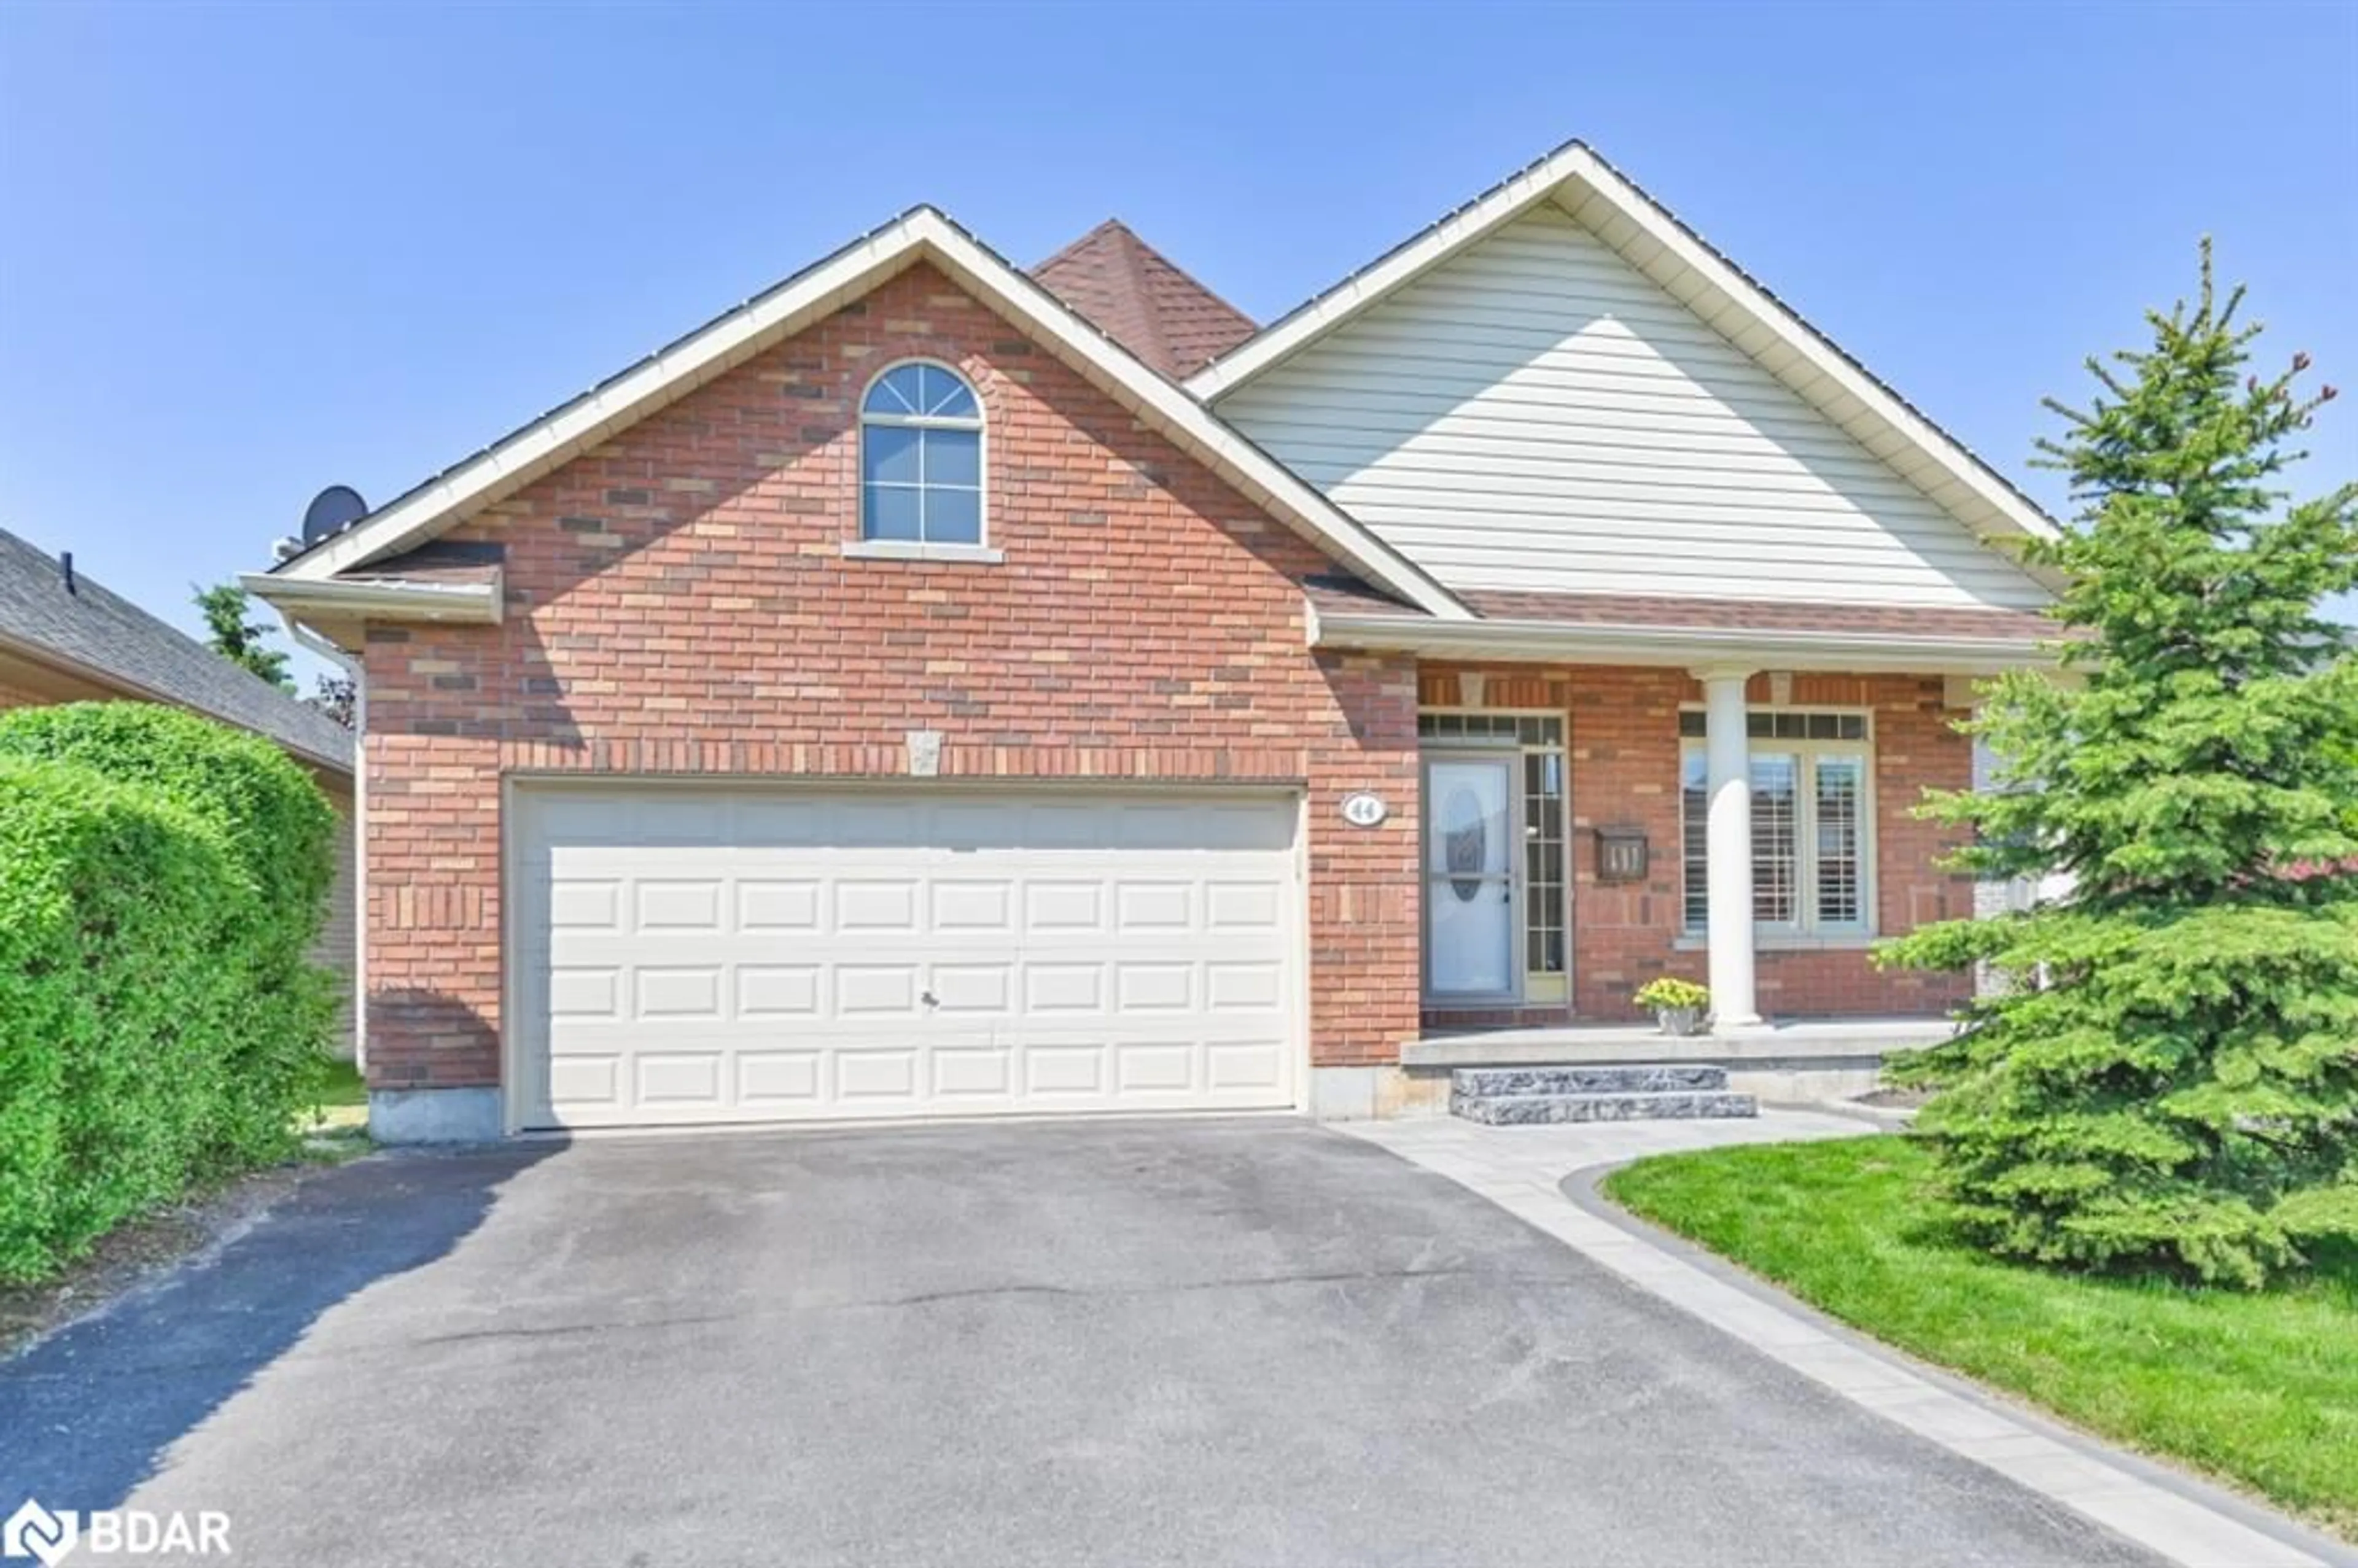 Home with brick exterior material for 44 Britton Pl, Belleville Ontario K8P 5N5